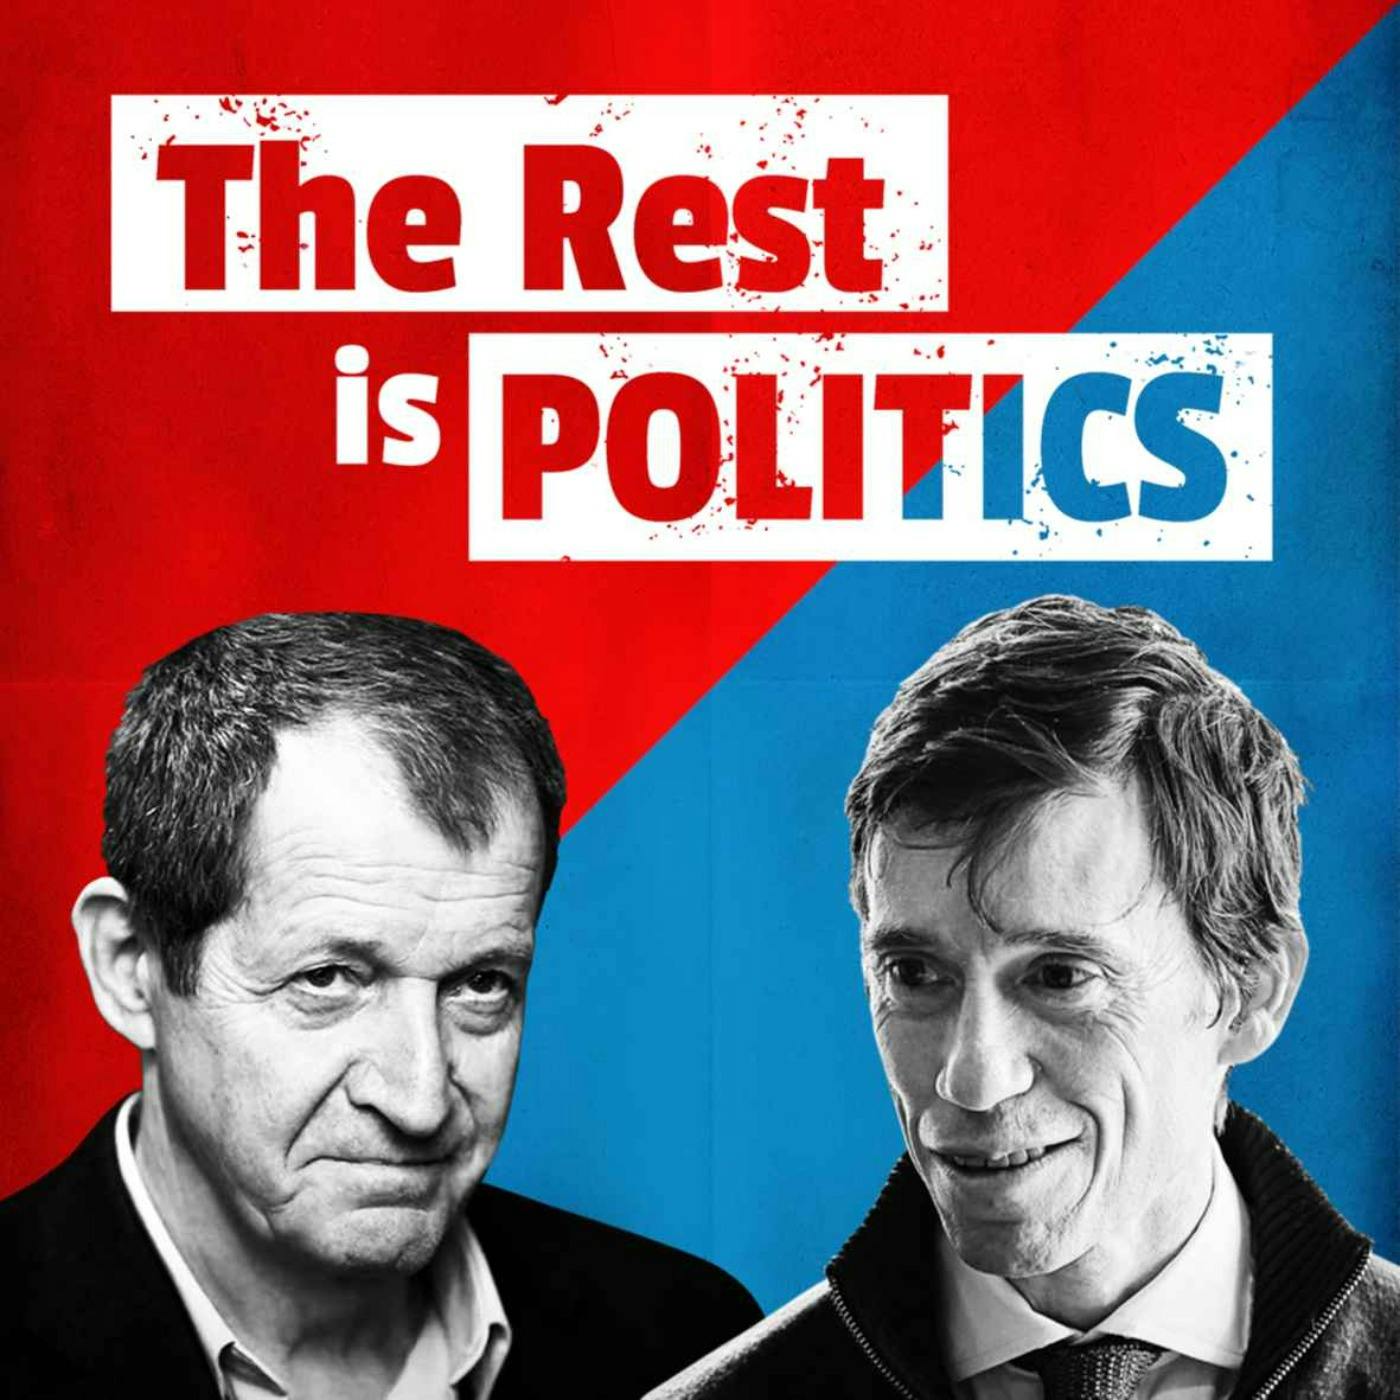 118. Question Time: Democracy under threat, rampant sewage, and campaign songs